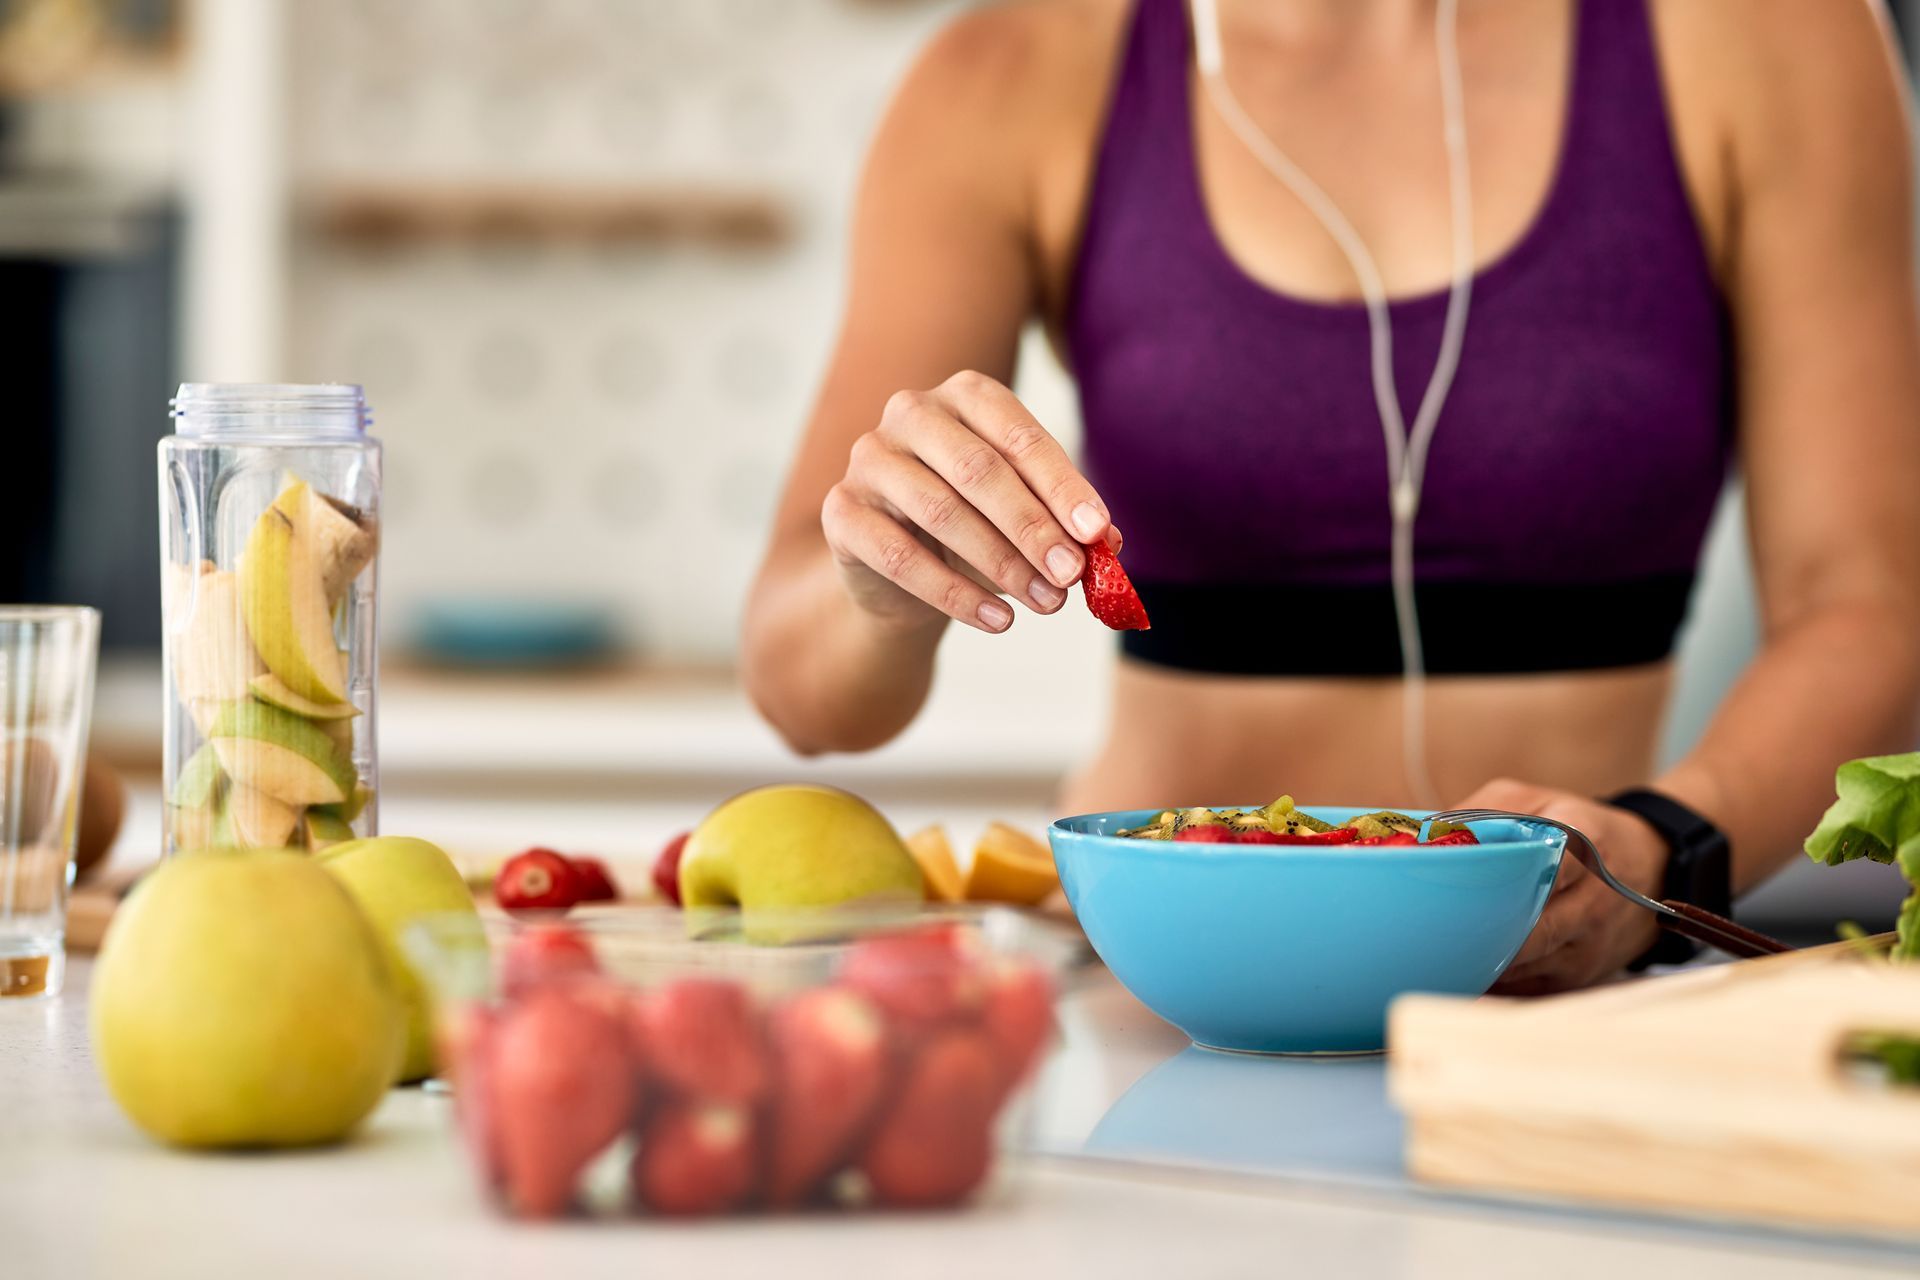 a woman is eating a bowl of fruit and cereal in a kitchen .